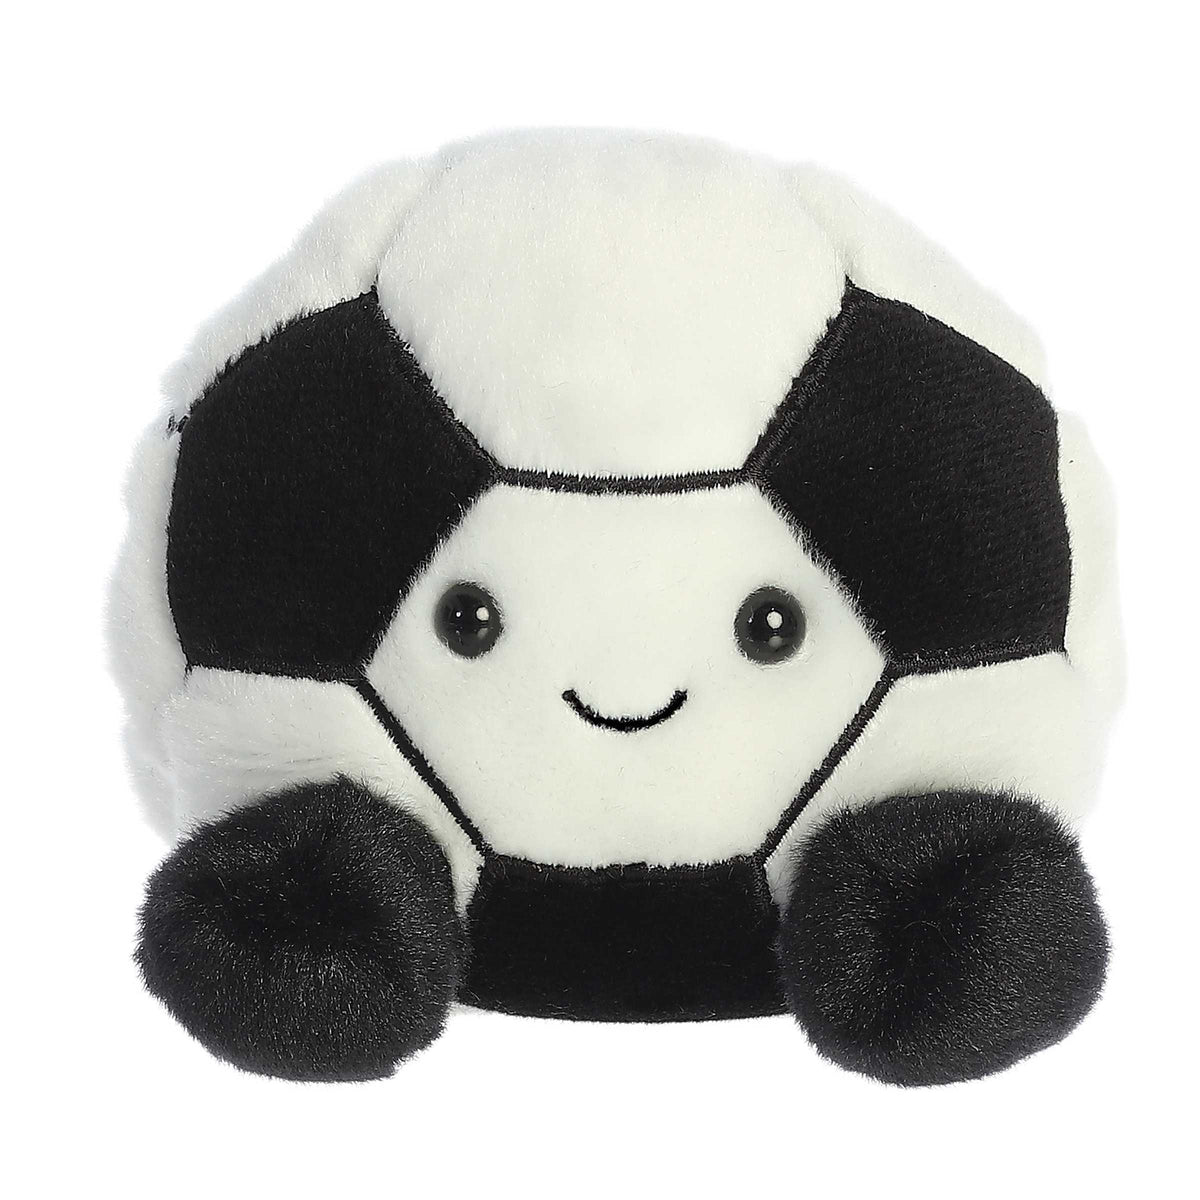 Striker Soccerball is a plushie with a bold pattern of black and white panels, mirroring a classic soccer ball!